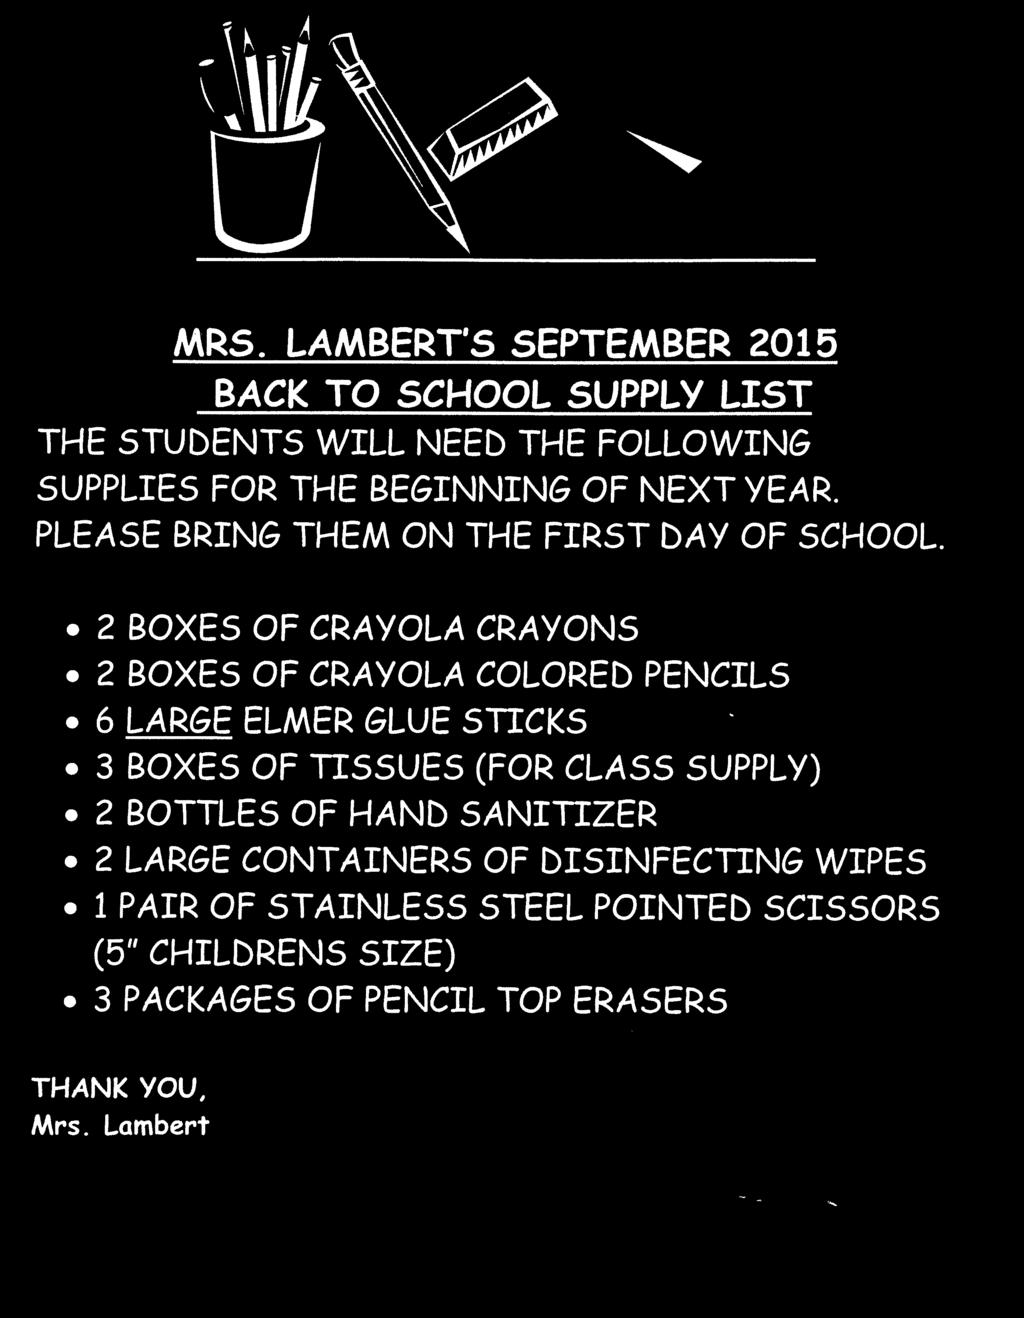 MRS. LAMBERT'S SEPTEMBER 2015 BACK TO SCHOOL SUPPLY LIST THE STUbENTS WILL NEEb THE FOLLOWING SUPPLIES FOR THE BEGINNING OF NEXT YEAR. PLEASE BRING THEM ON THE FIRST bay OF SCHOOL.